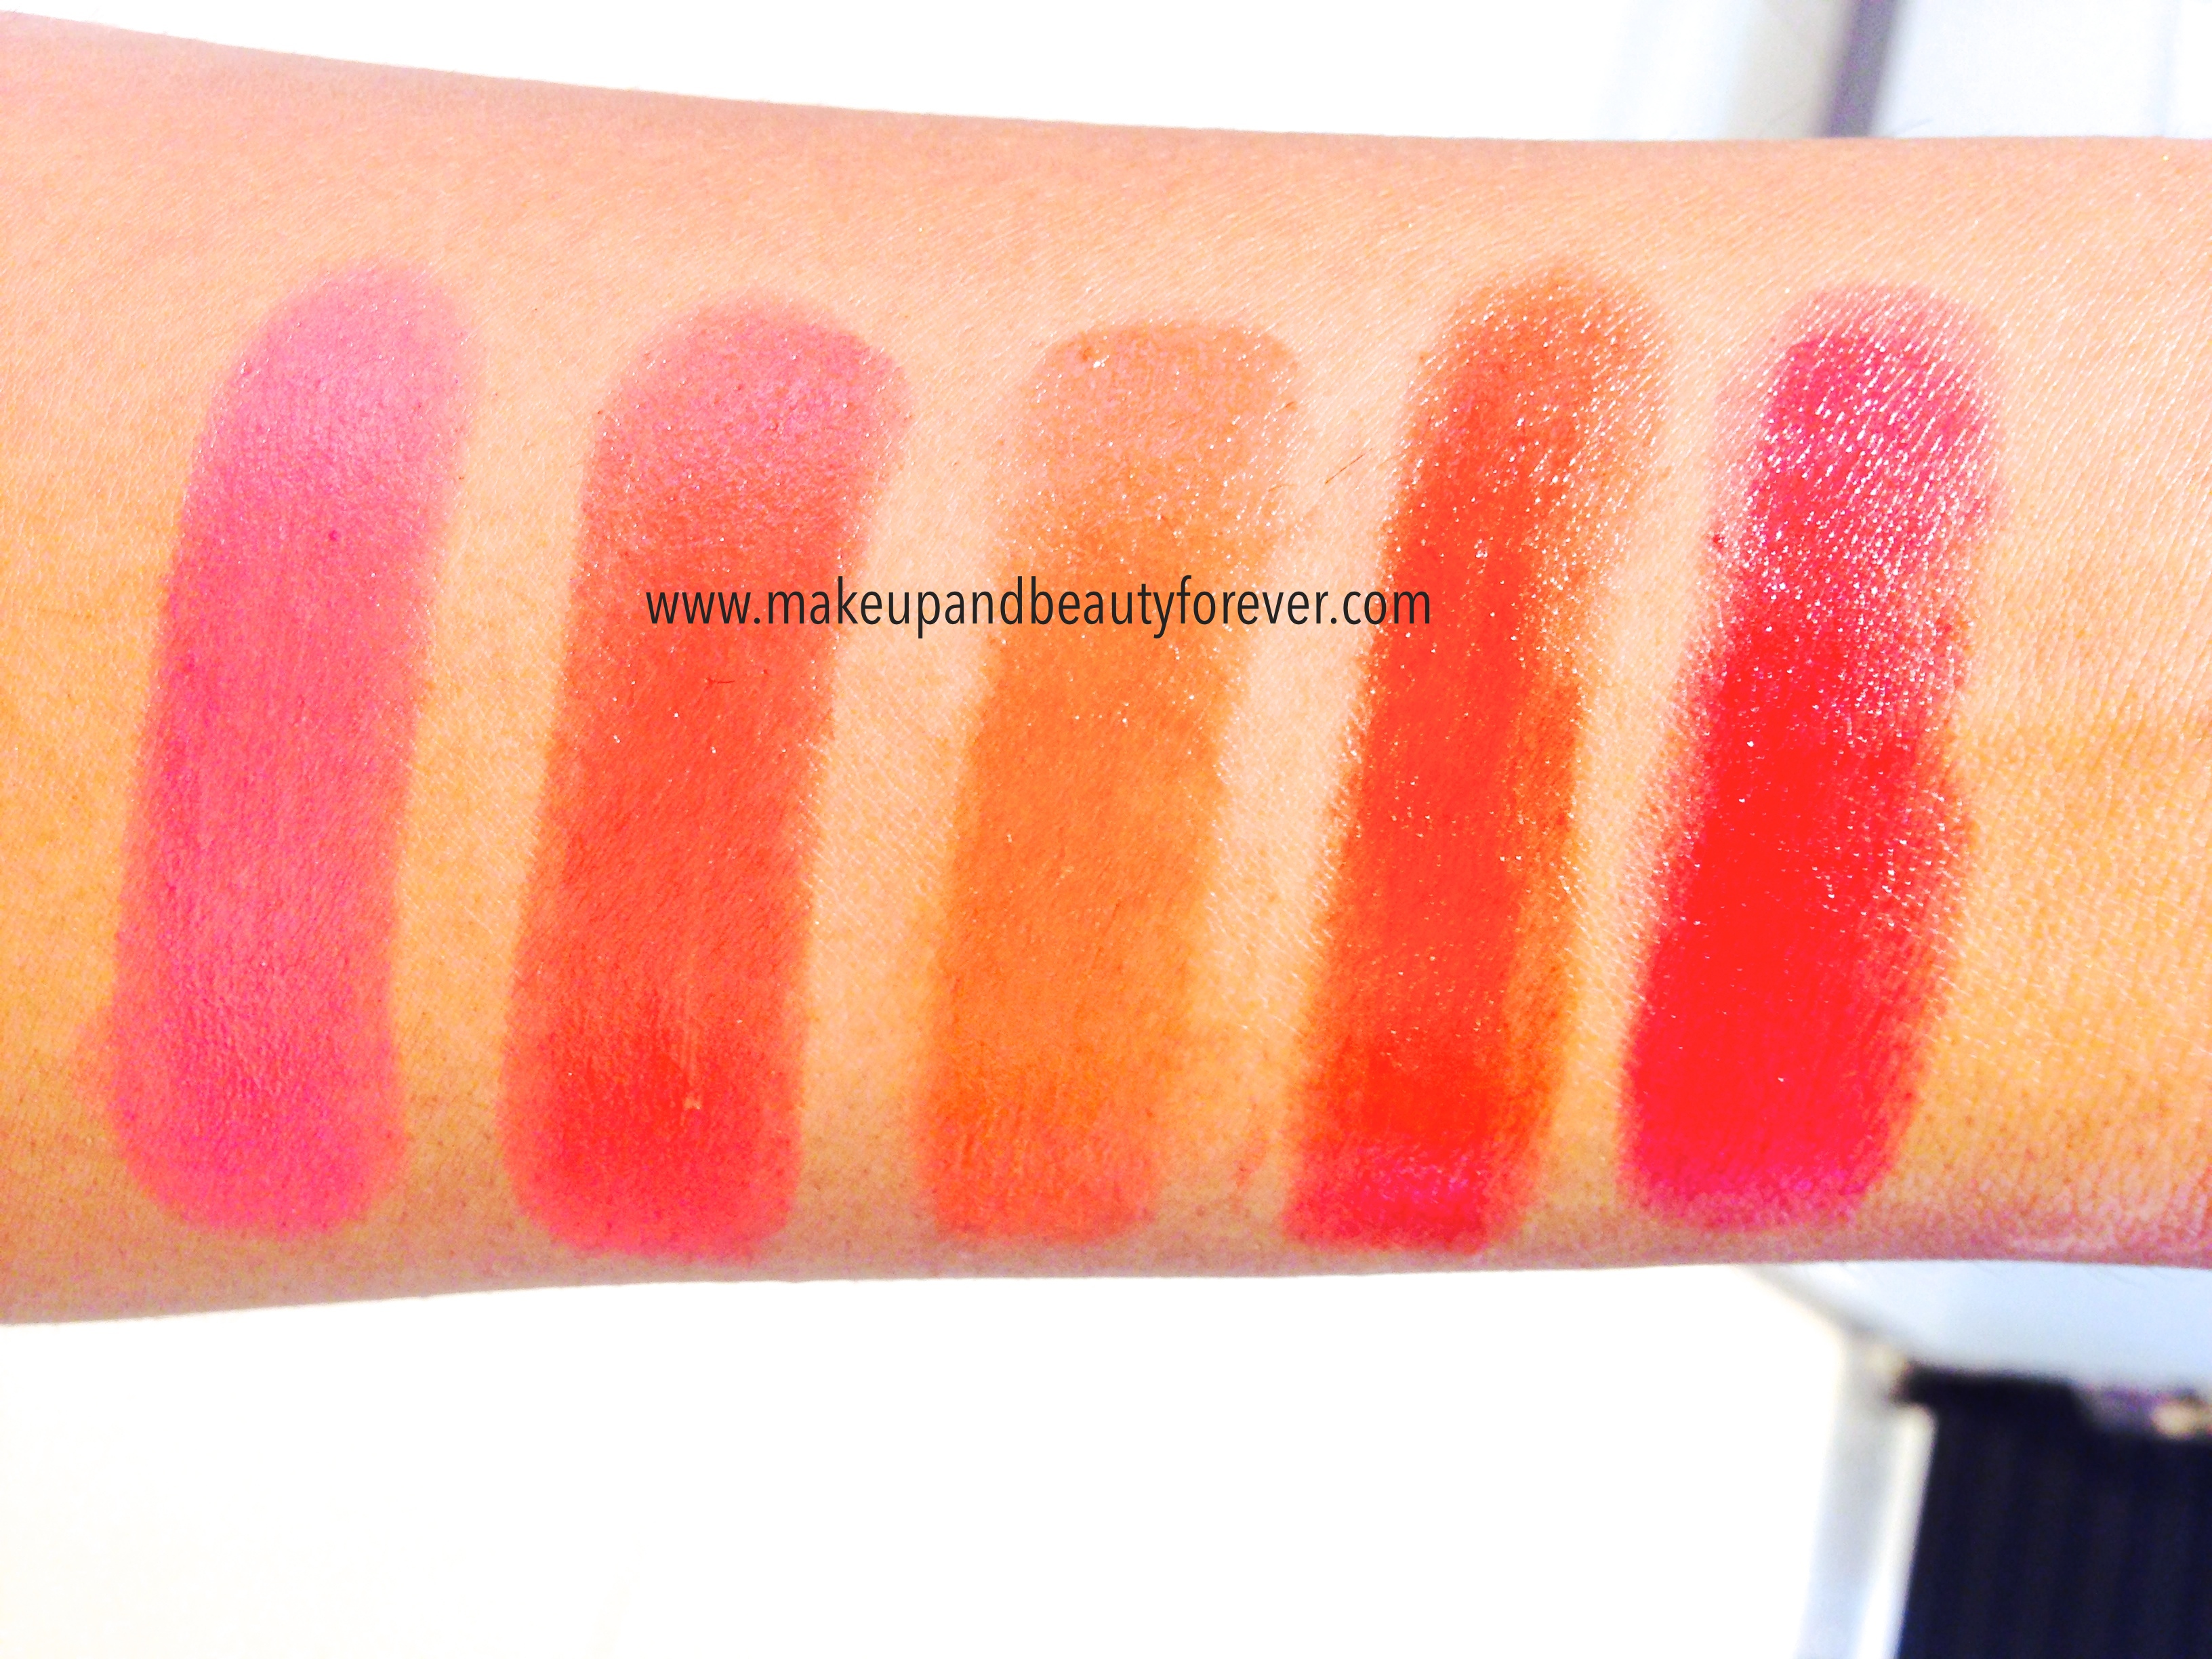 All Maybelline Bold Matte Colorsensational Lipsticks Review, Swatches, Shades, Price and Details India